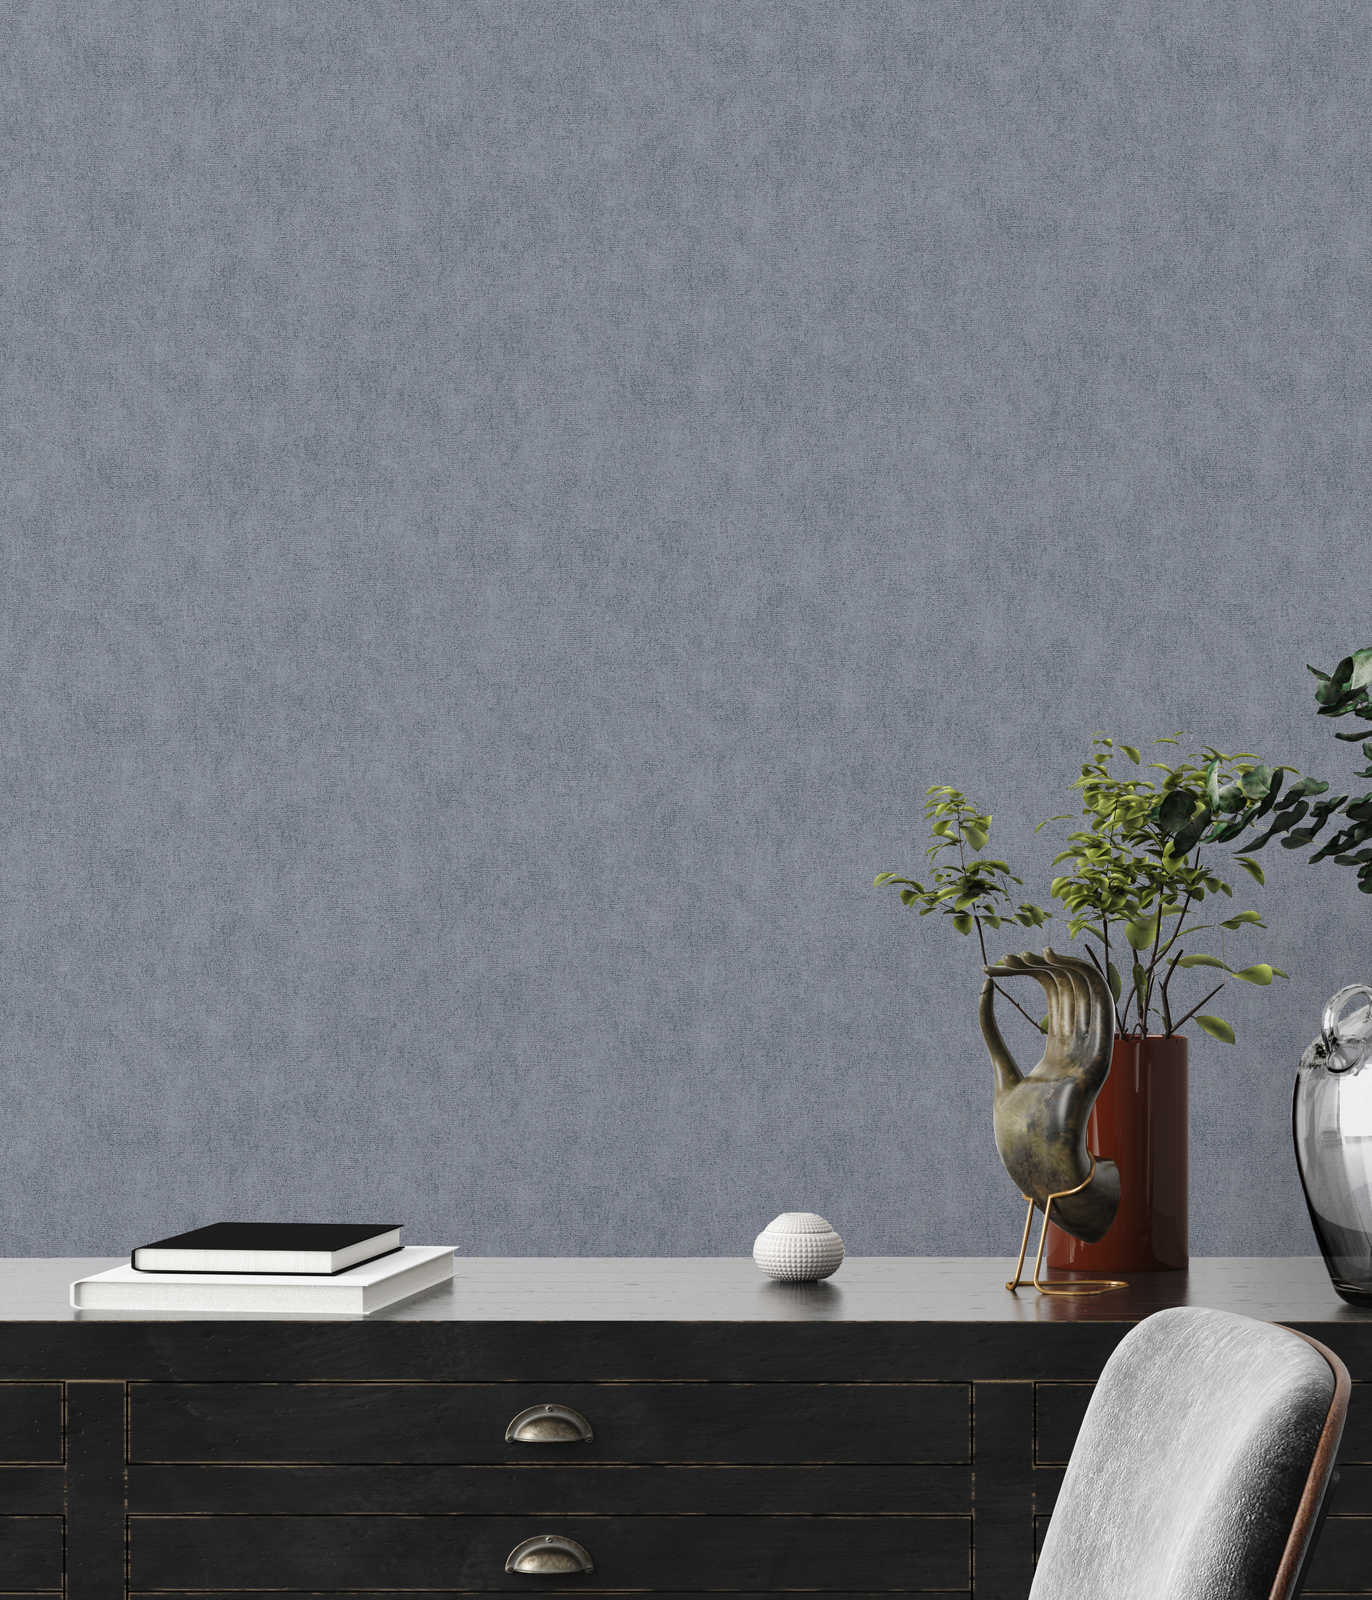             Dove blue plain wallpaper with hatching & shimmer effect - Blue
        